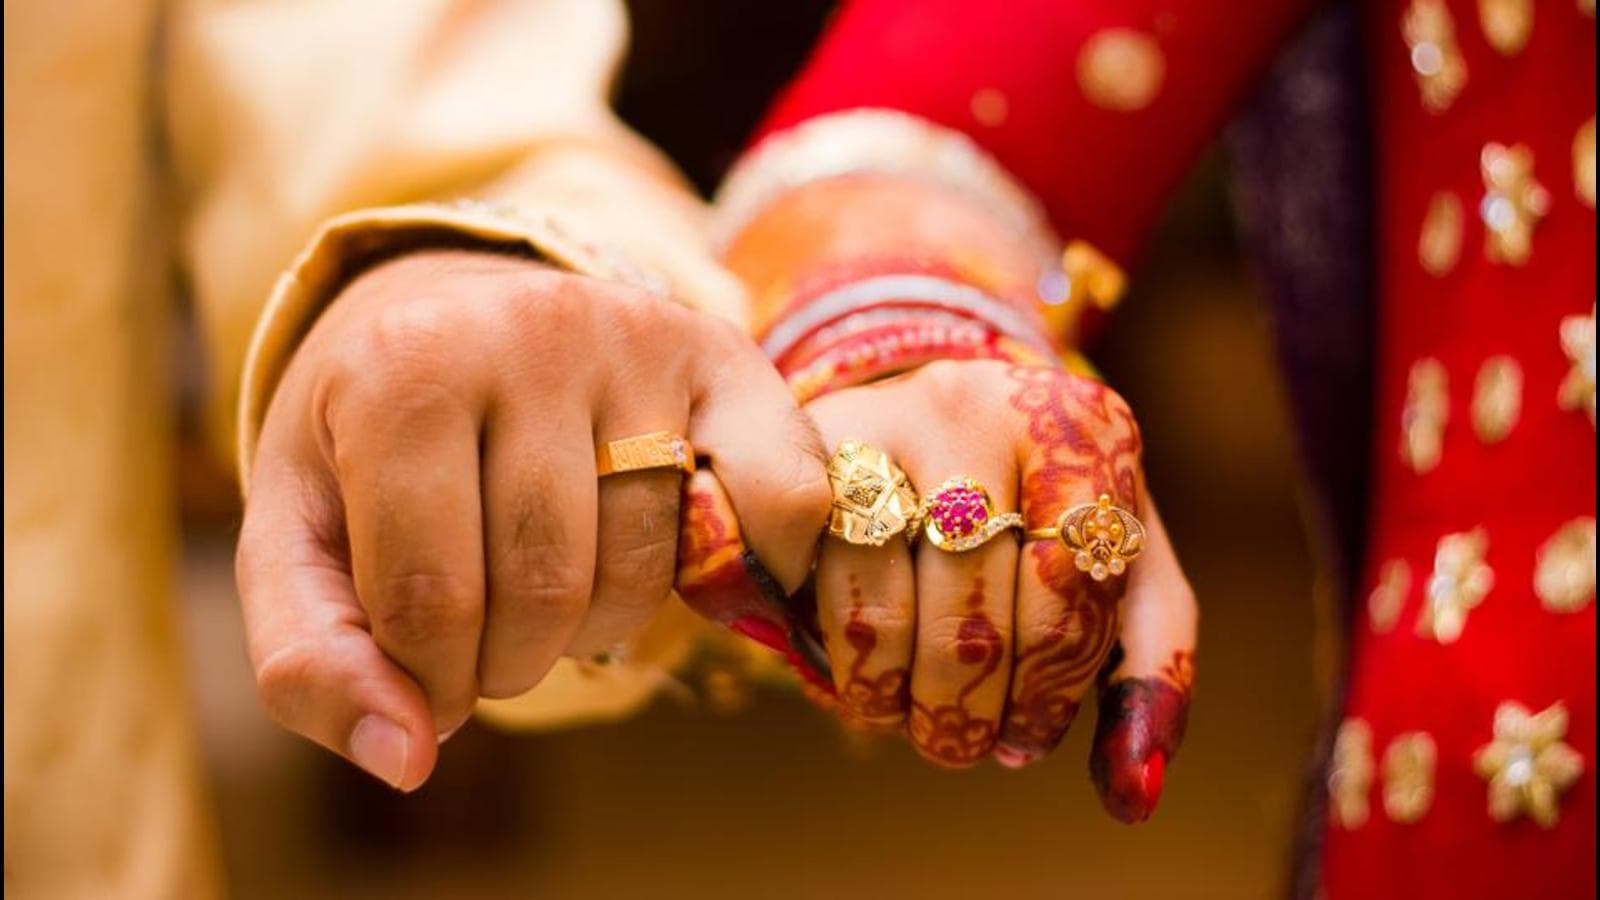 about love marriage and arranged marriage